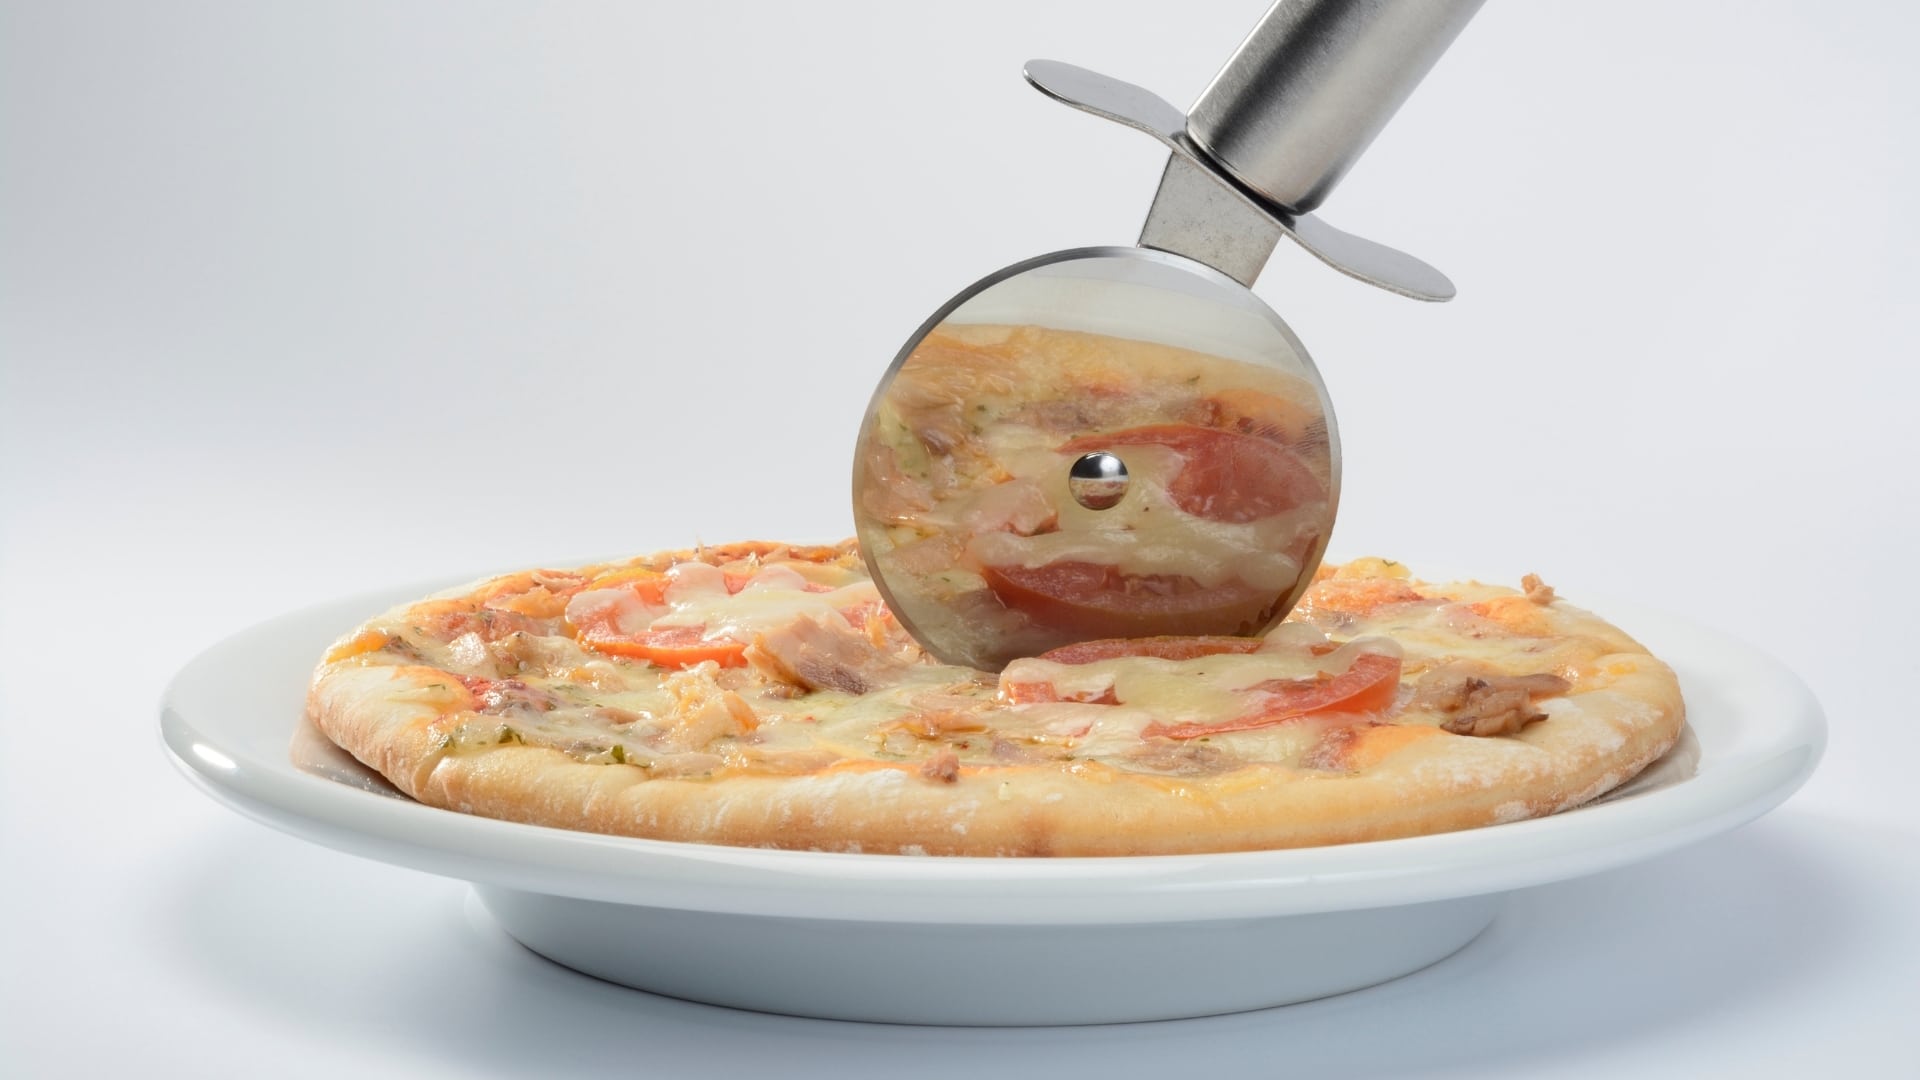 Pizza Knife - Choosing the Best Pizza Knife for Home